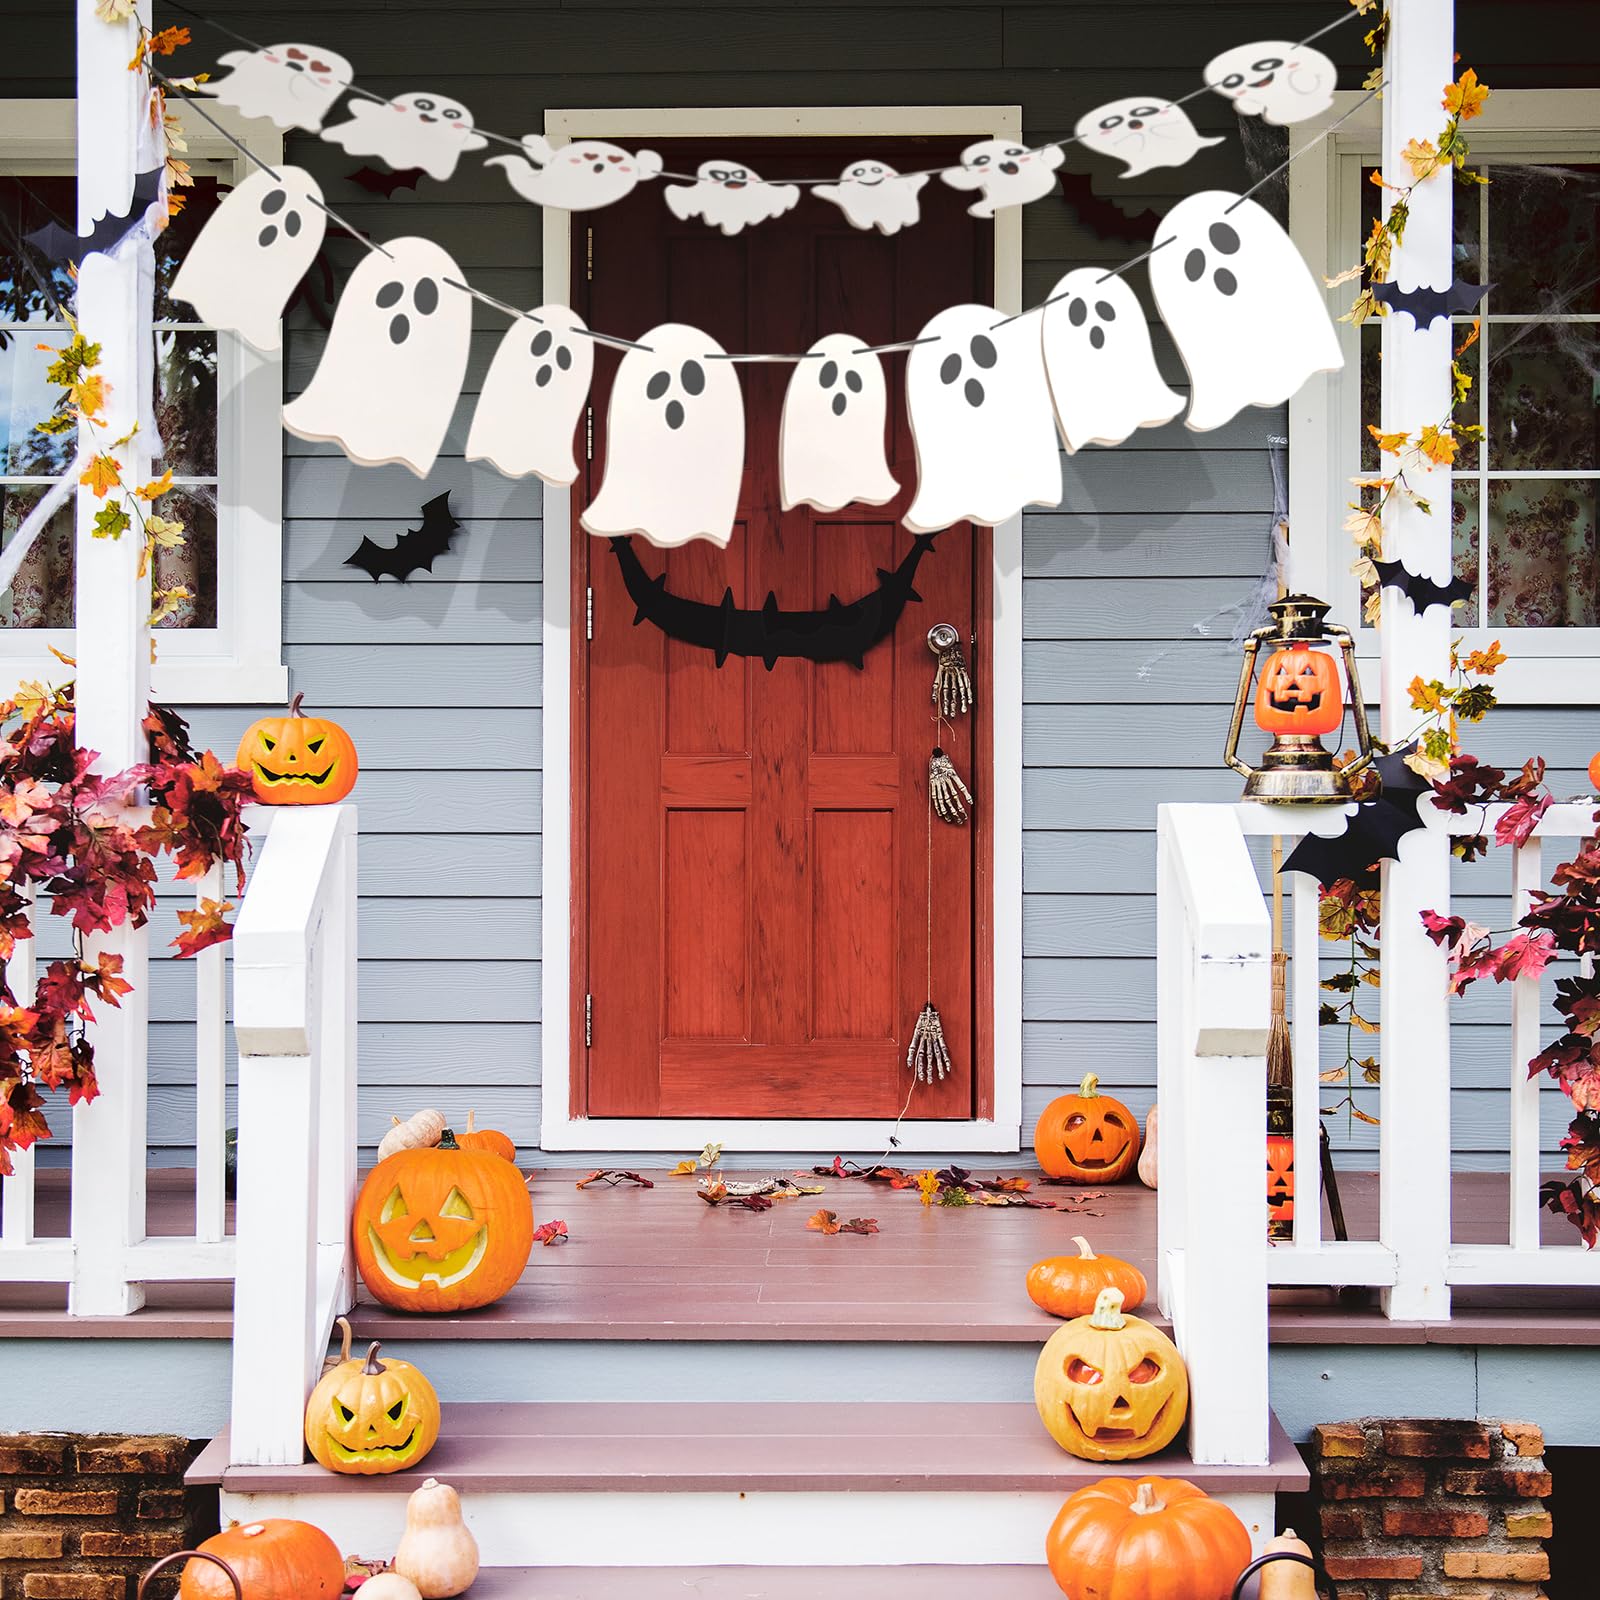 Comelodiant 2 Pack White Halloween Hanging Ghost Banner Halloween Ghost Garland for Haunted Houses Halloween Party Indoor Outdoor Decorations Home Mantel Decorations